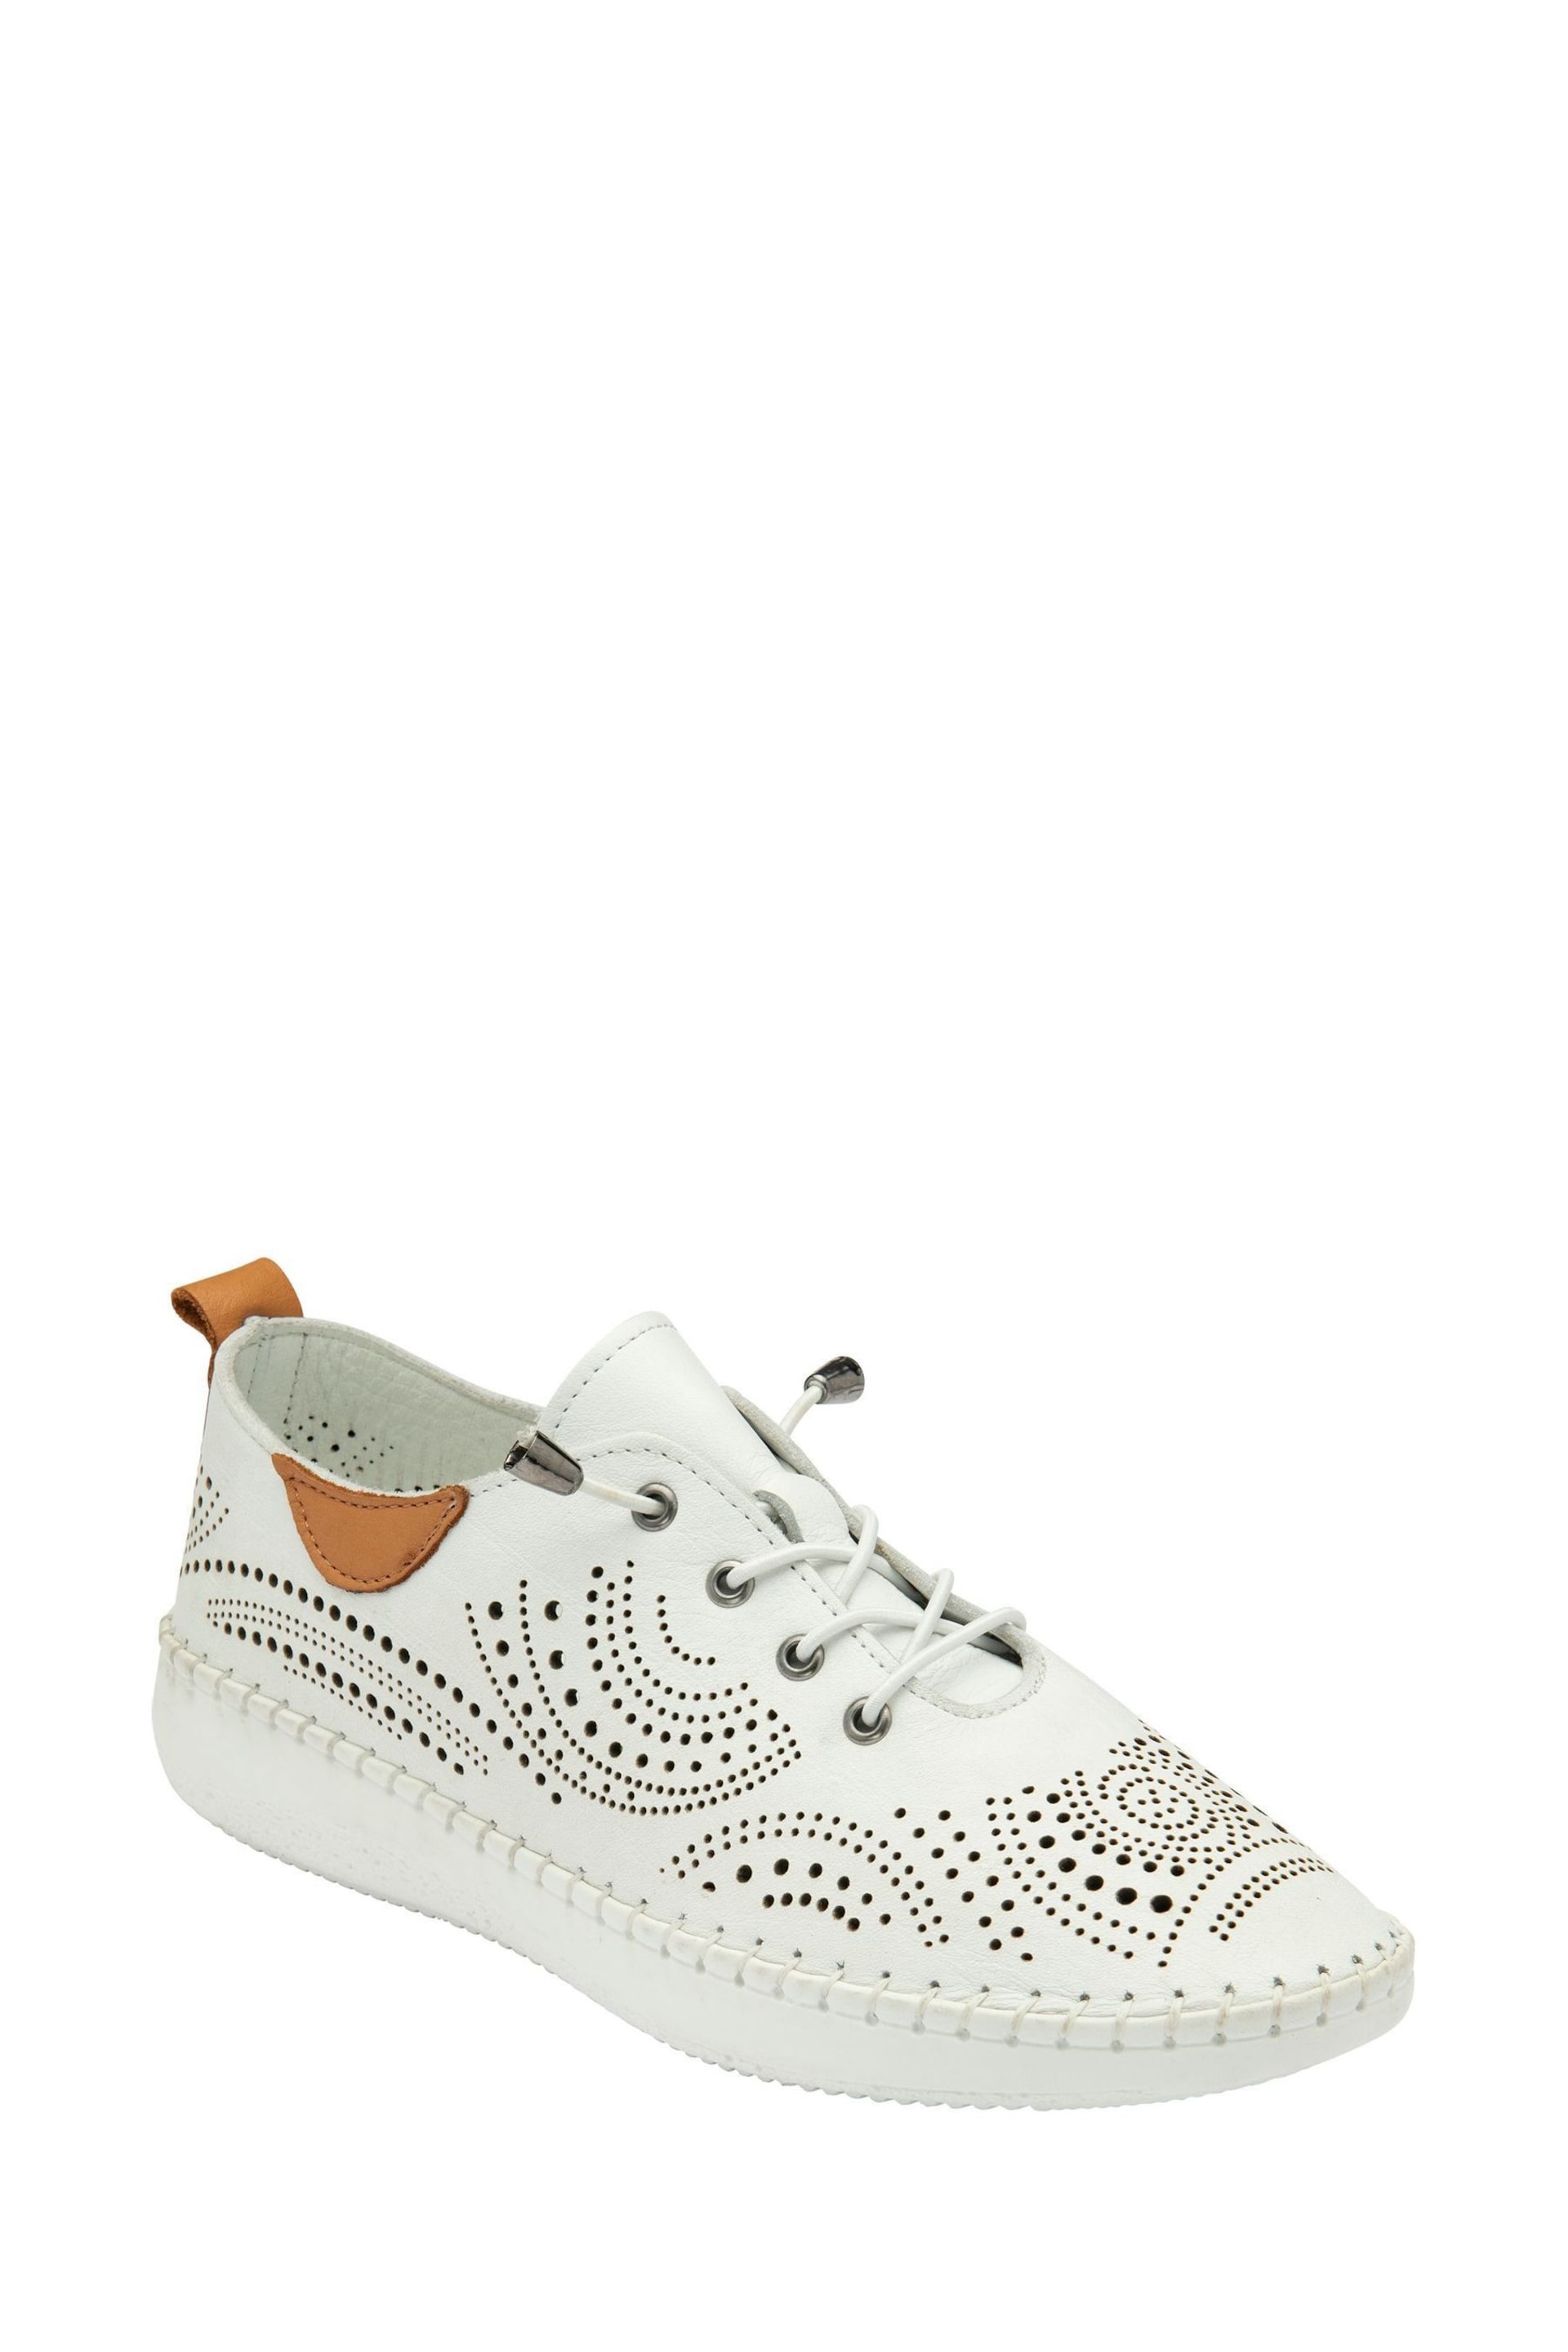 Lotus White Leather Casual Shoes - Image 1 of 4